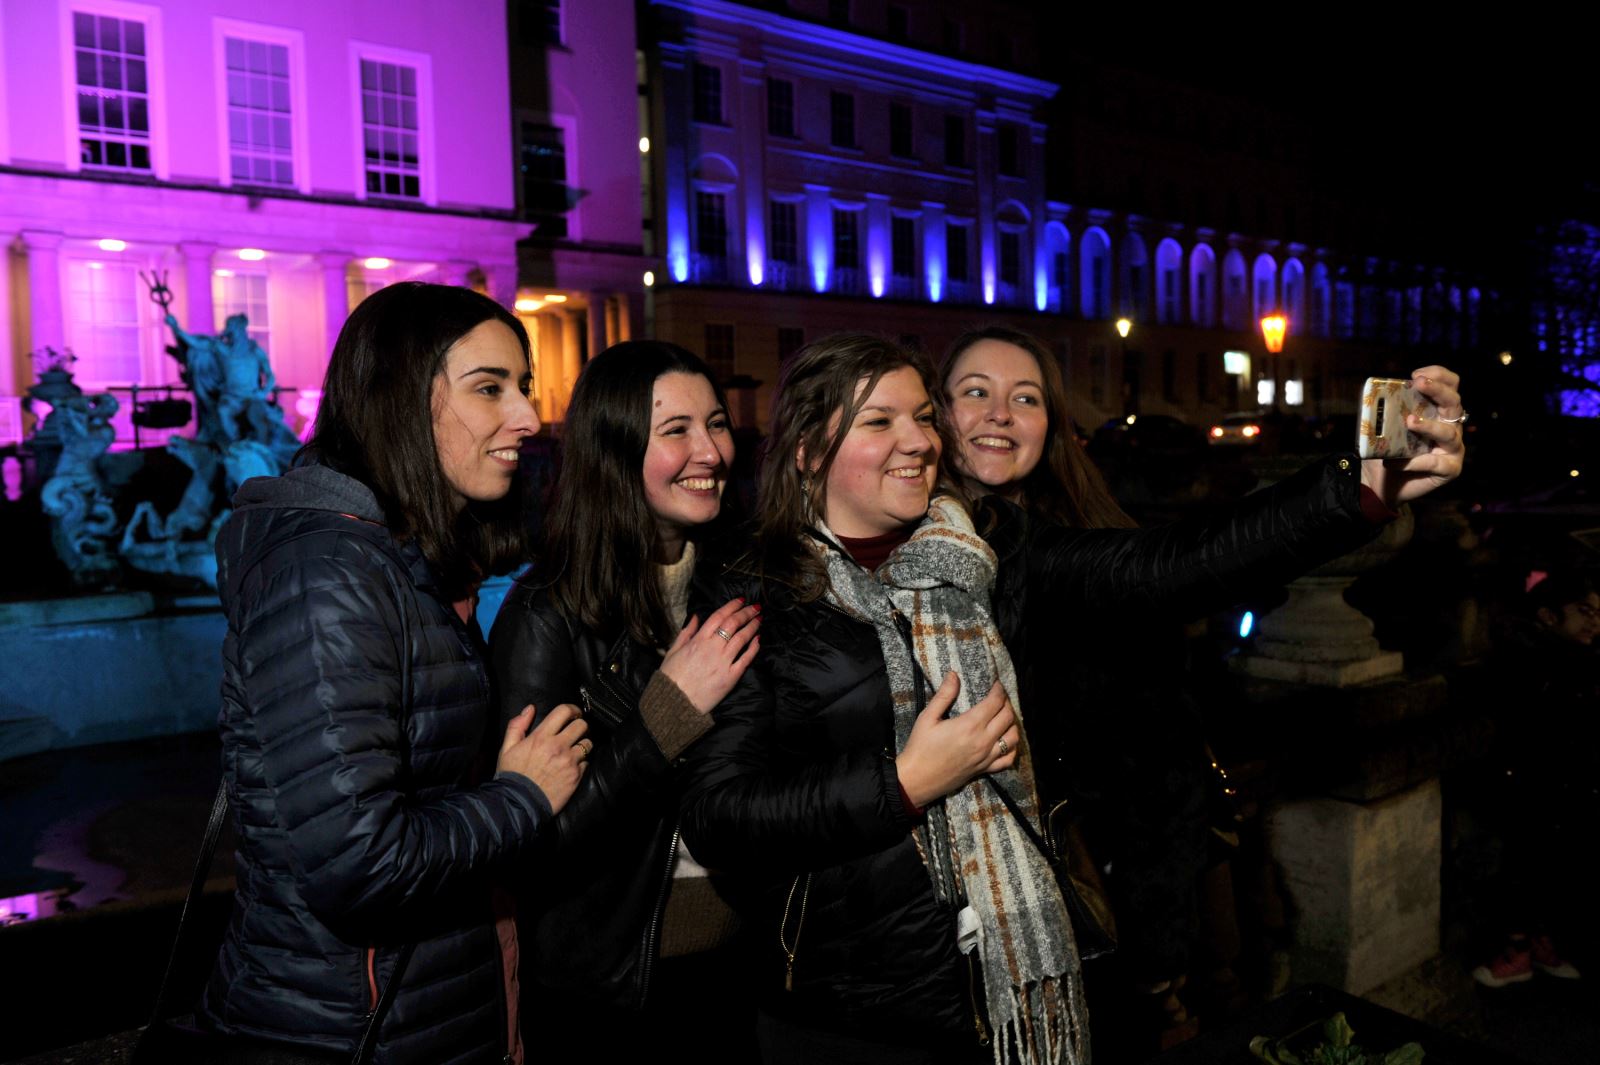 Spectators taking a selfie in front of a lit up Neptune's Fountain